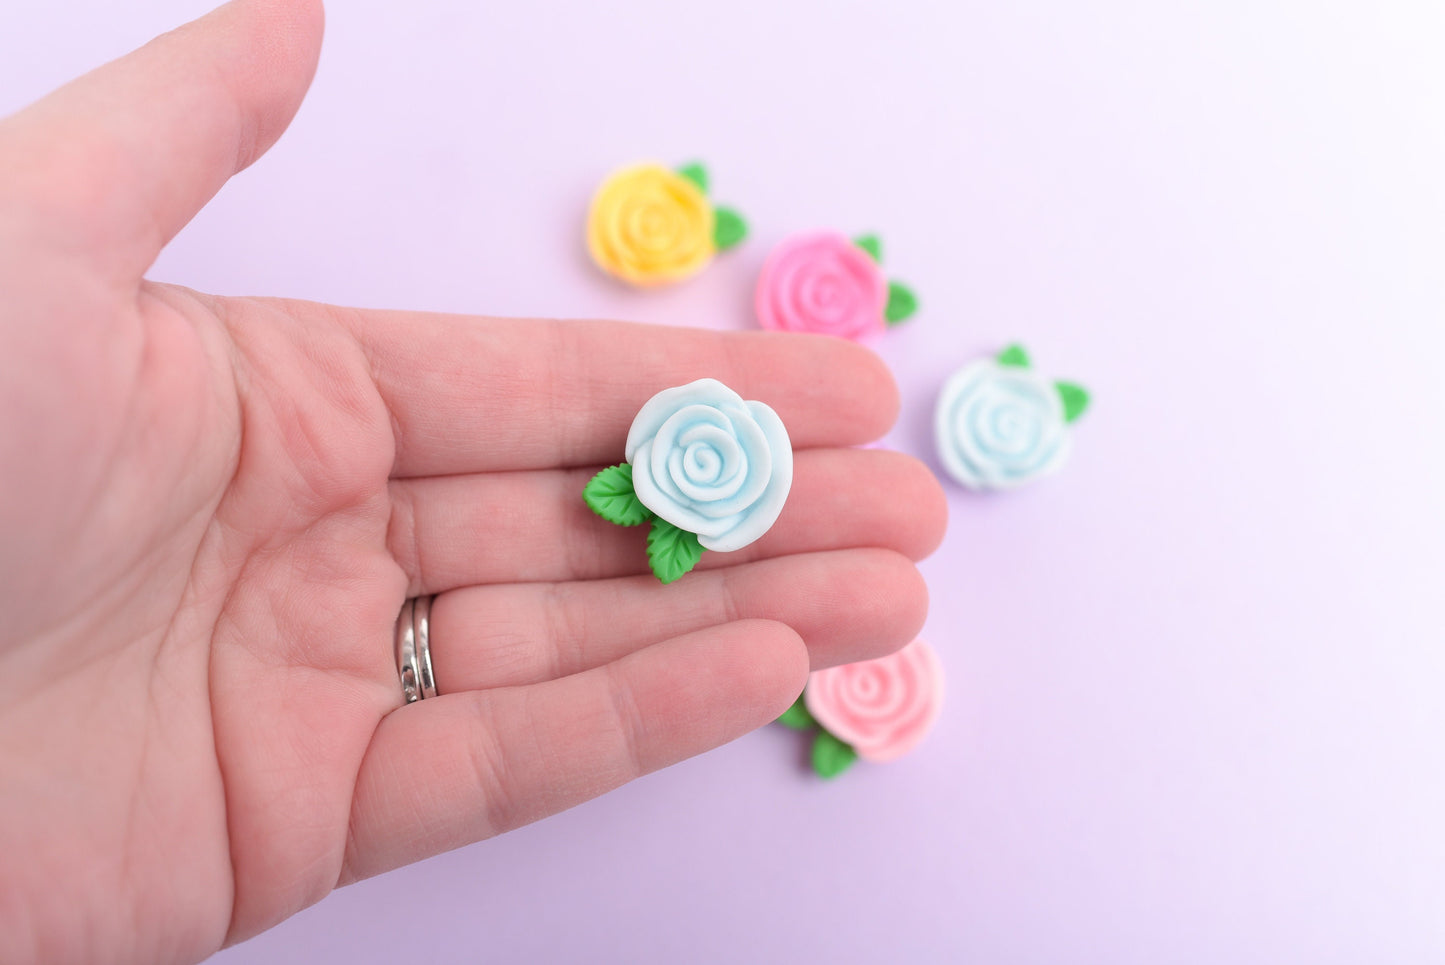 Pretty Rose Magnets or Push Pins in Assorted Pastel Colors